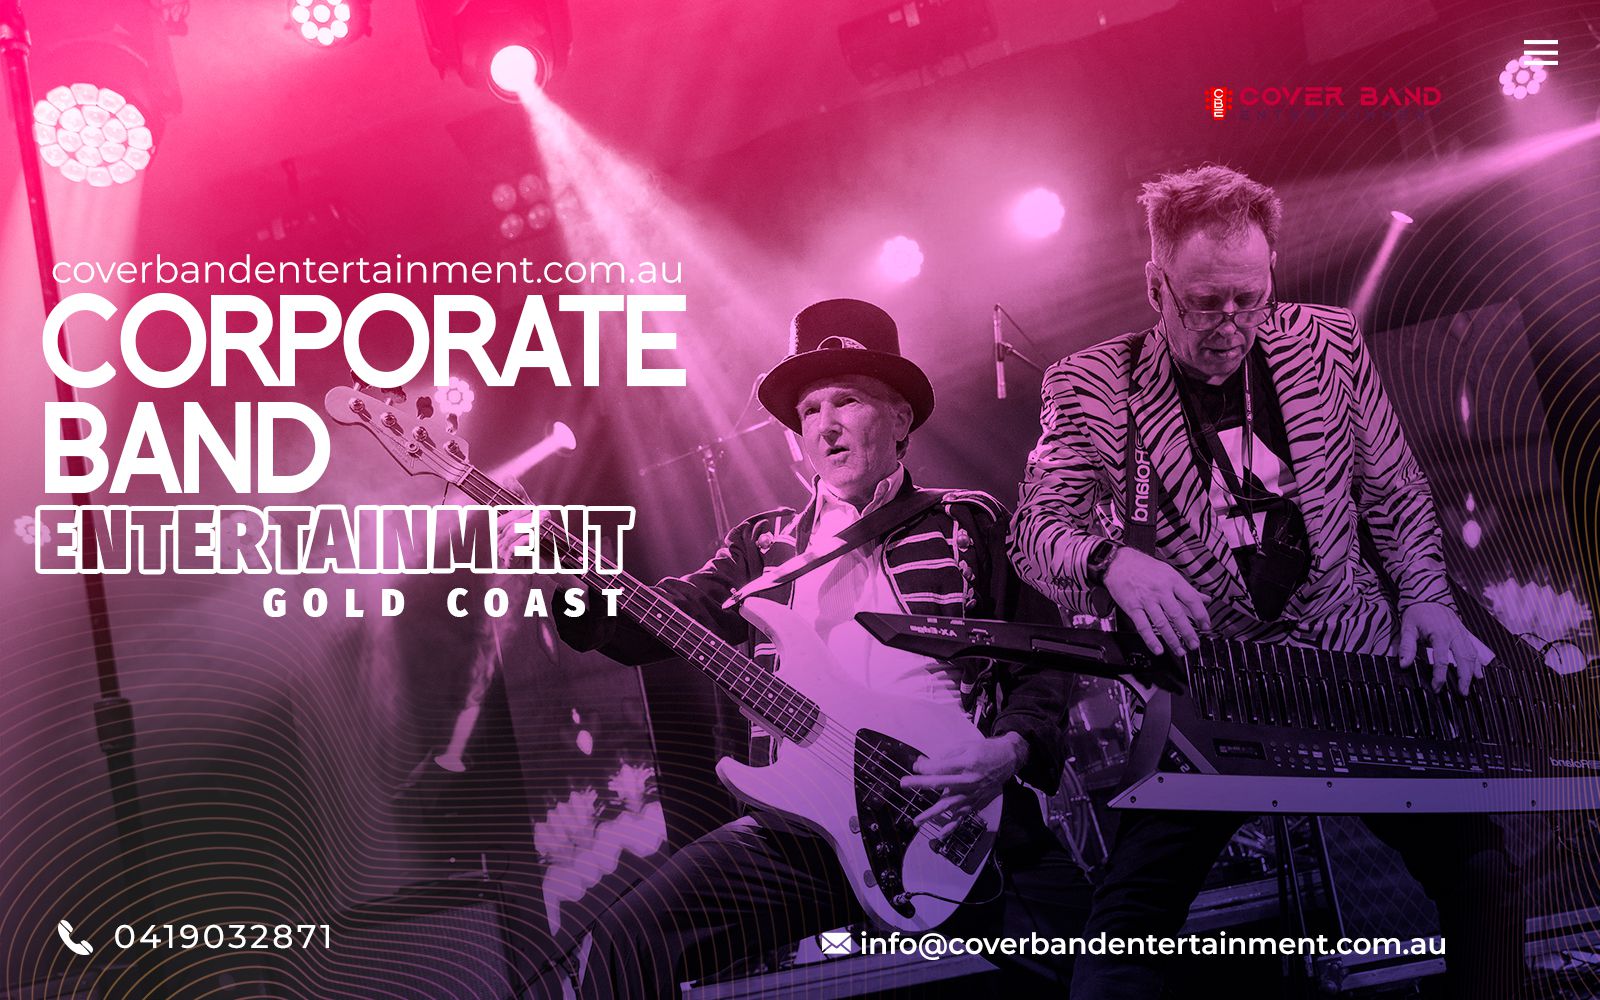 Corporate Band Entertainment: The Importance Of Music In Corporate Events